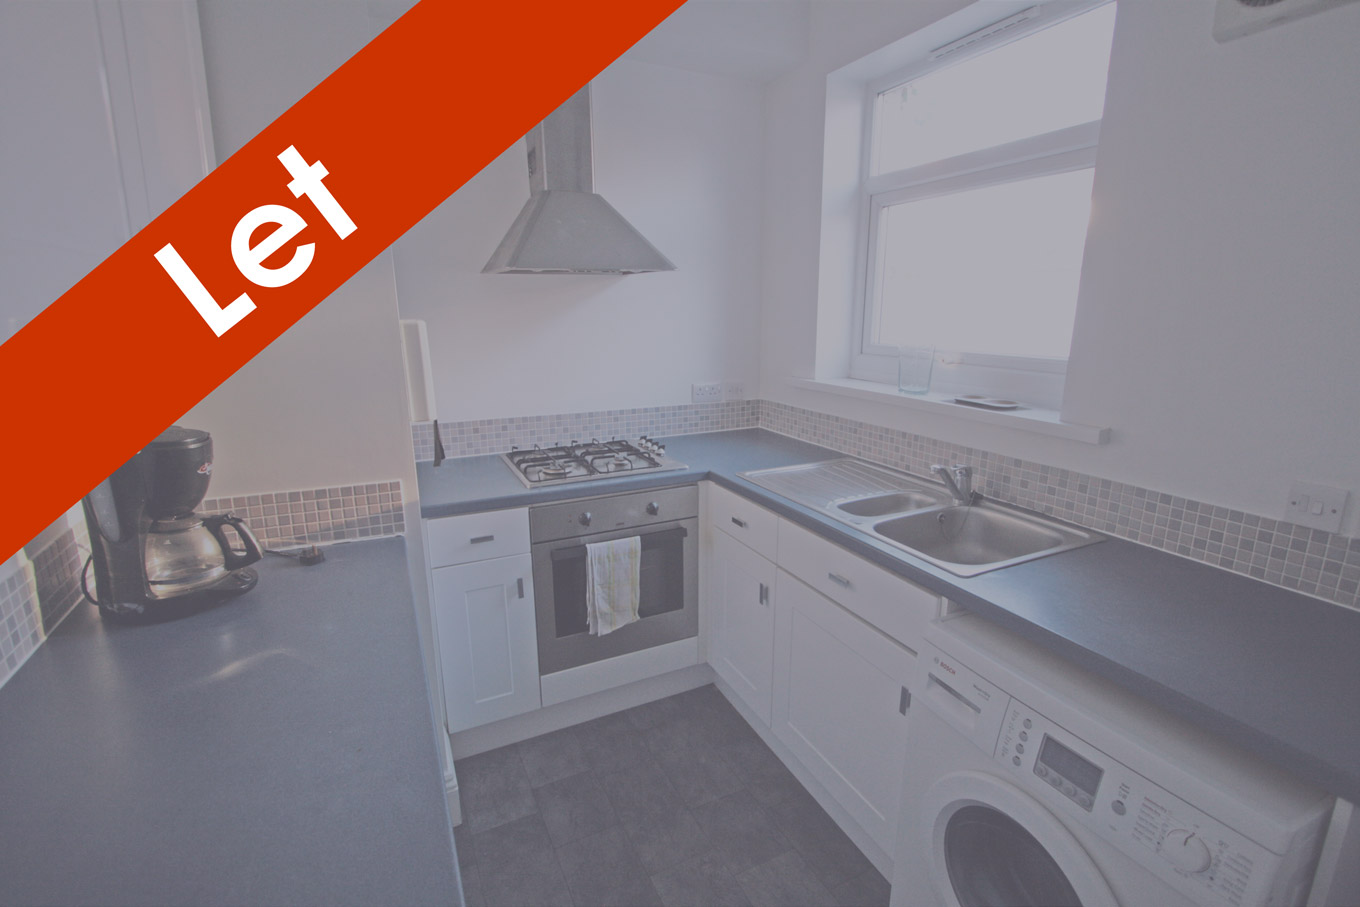 Malefant St, Cathays – 1 Bed Flat with additional study room